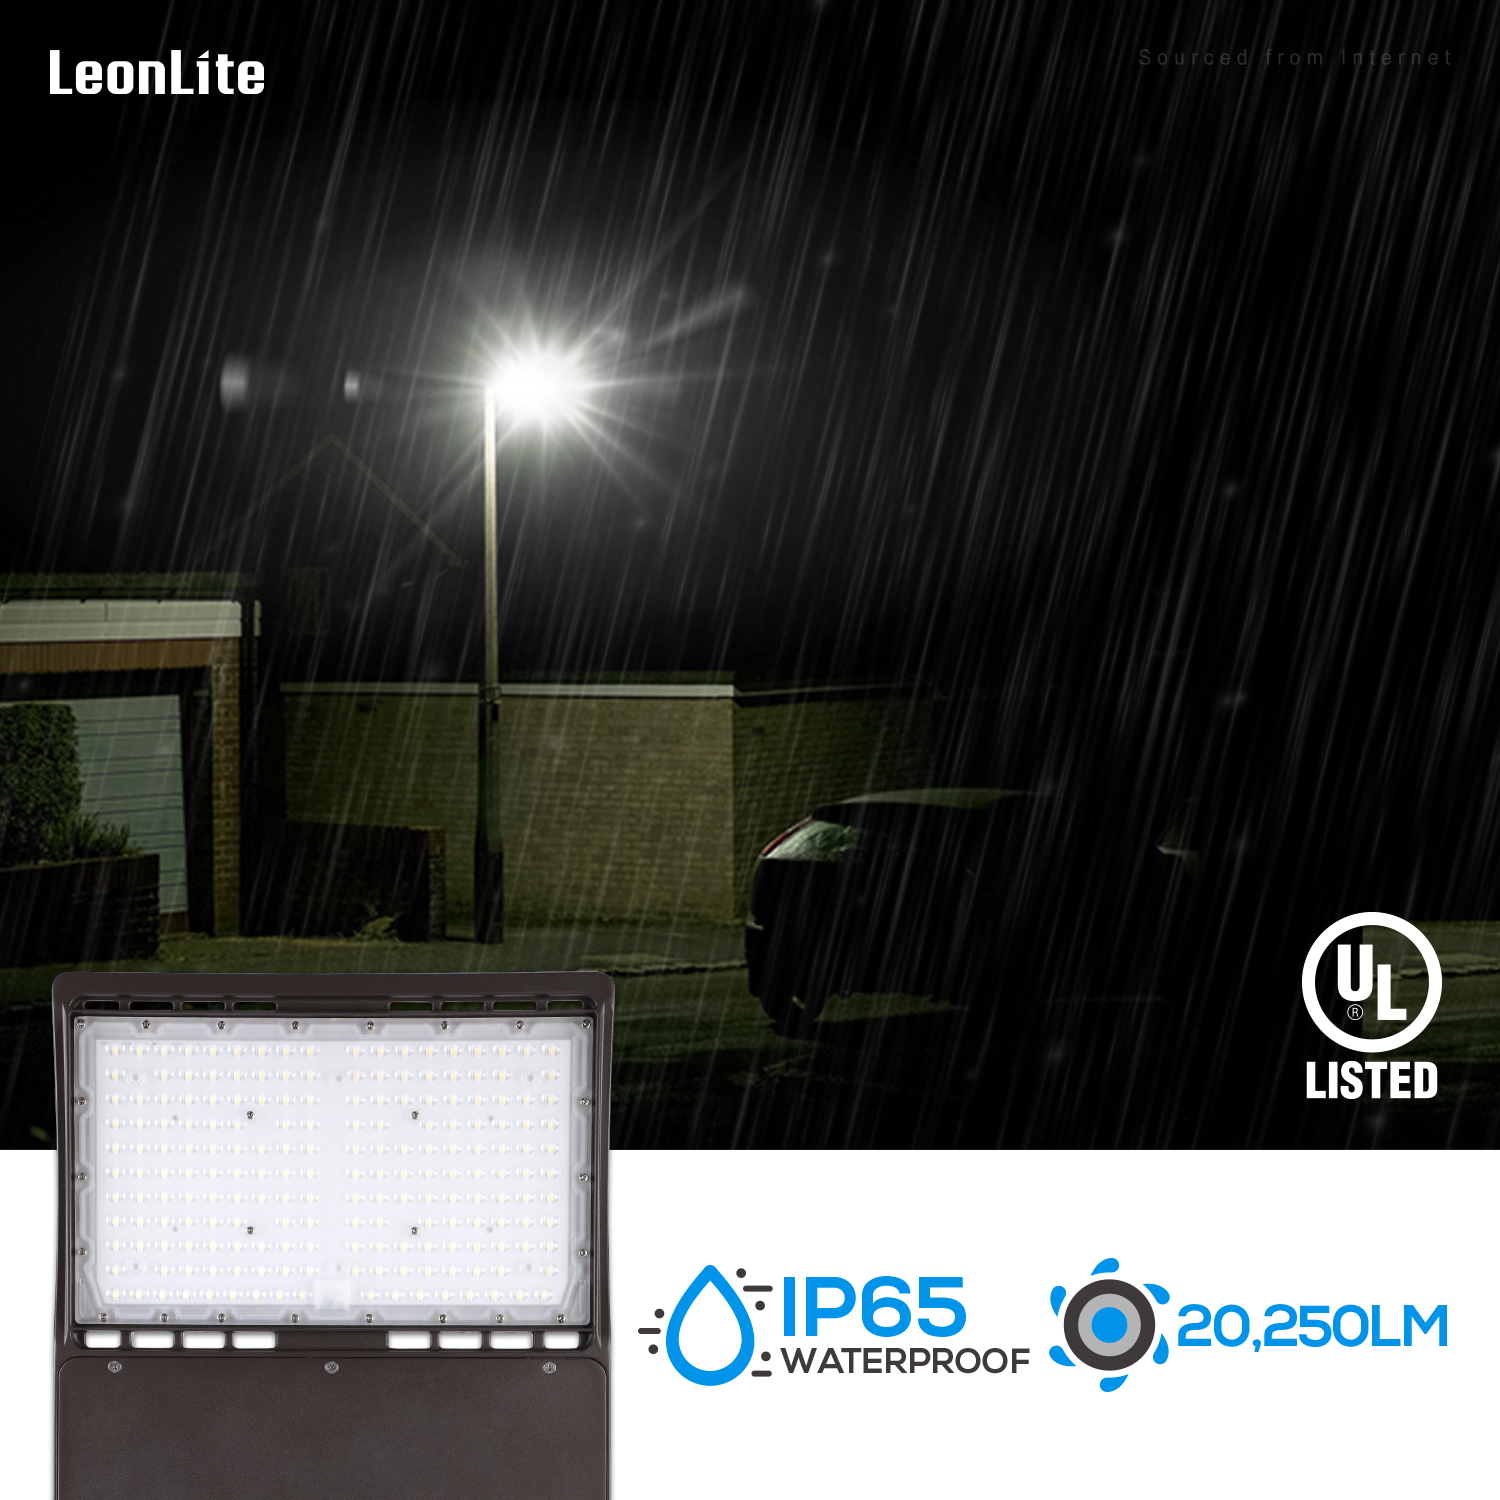 LEONLITE 150W LED Parking Lot Light, UL Listed Dusk to Dawn Area Light with Photocell, IP65 Waterproof Slipfitter Mount Shoebox, 5000K Daylight for Driveway, Street, Playground, Shorting Cap Included - image 2 of 7